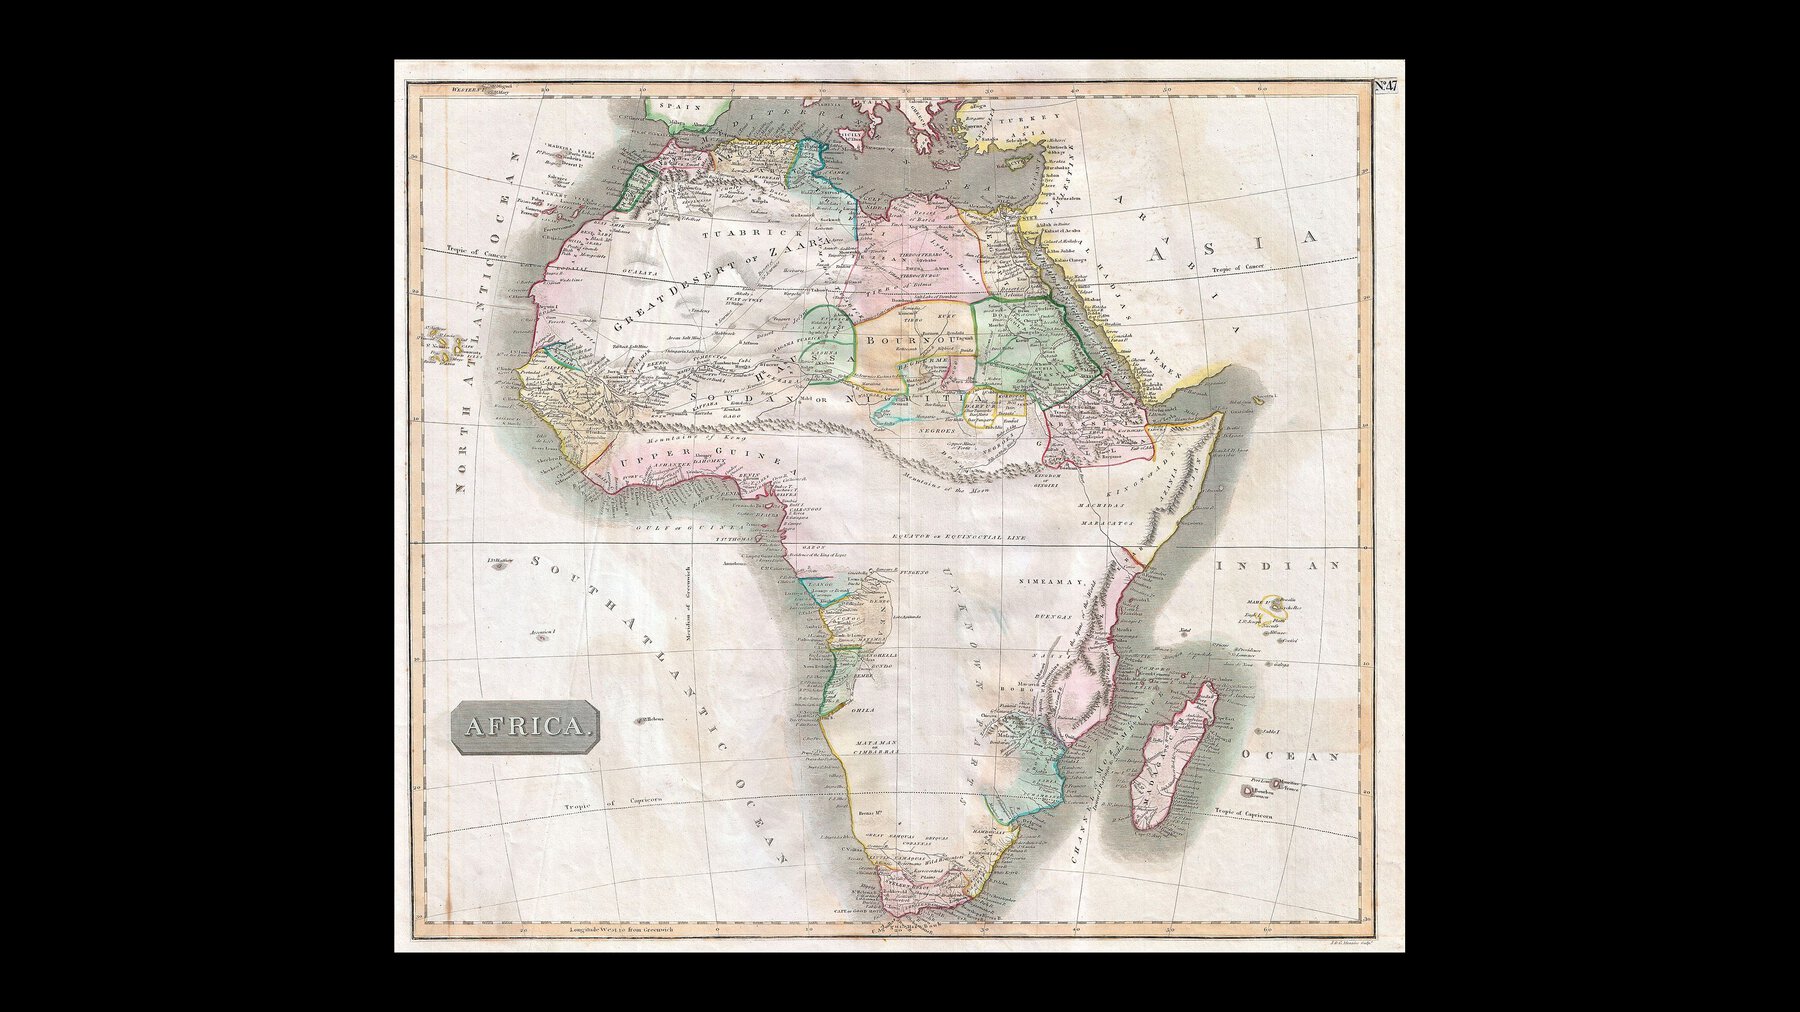 A map of Africa denoting large portions as unknown but depicting notable detail in the known areas.